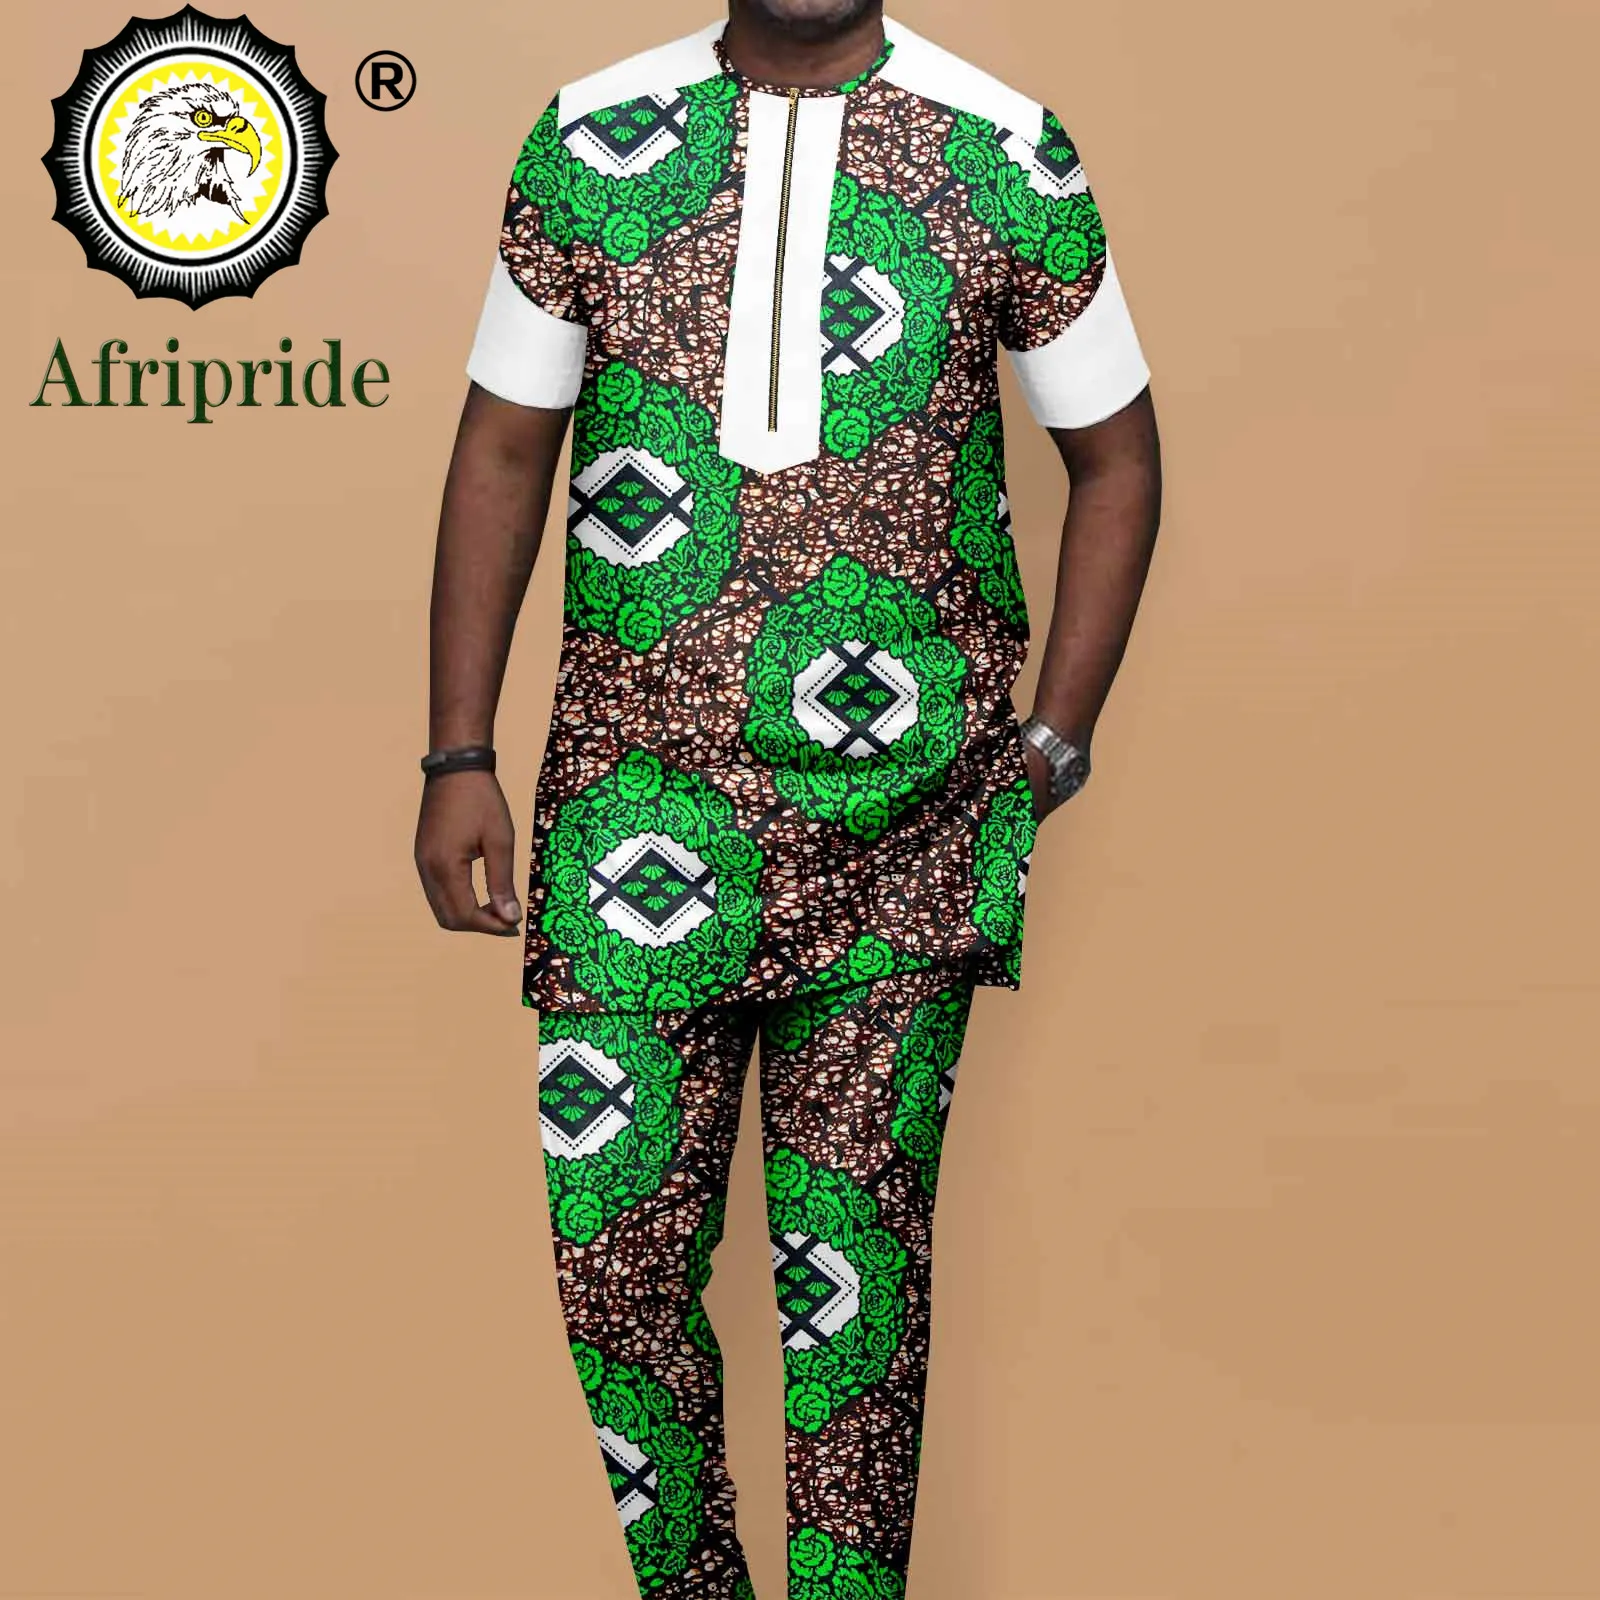 African Tracksuit for Men Dashiki Print Shirts and Ankara Pants Tracksuit Tribal Outwear Plus Size Casual Clothes A2216031 african men s sportswear dashiki printed short sleeve shirt and ankara trousers tribal outdoor casual a2216031